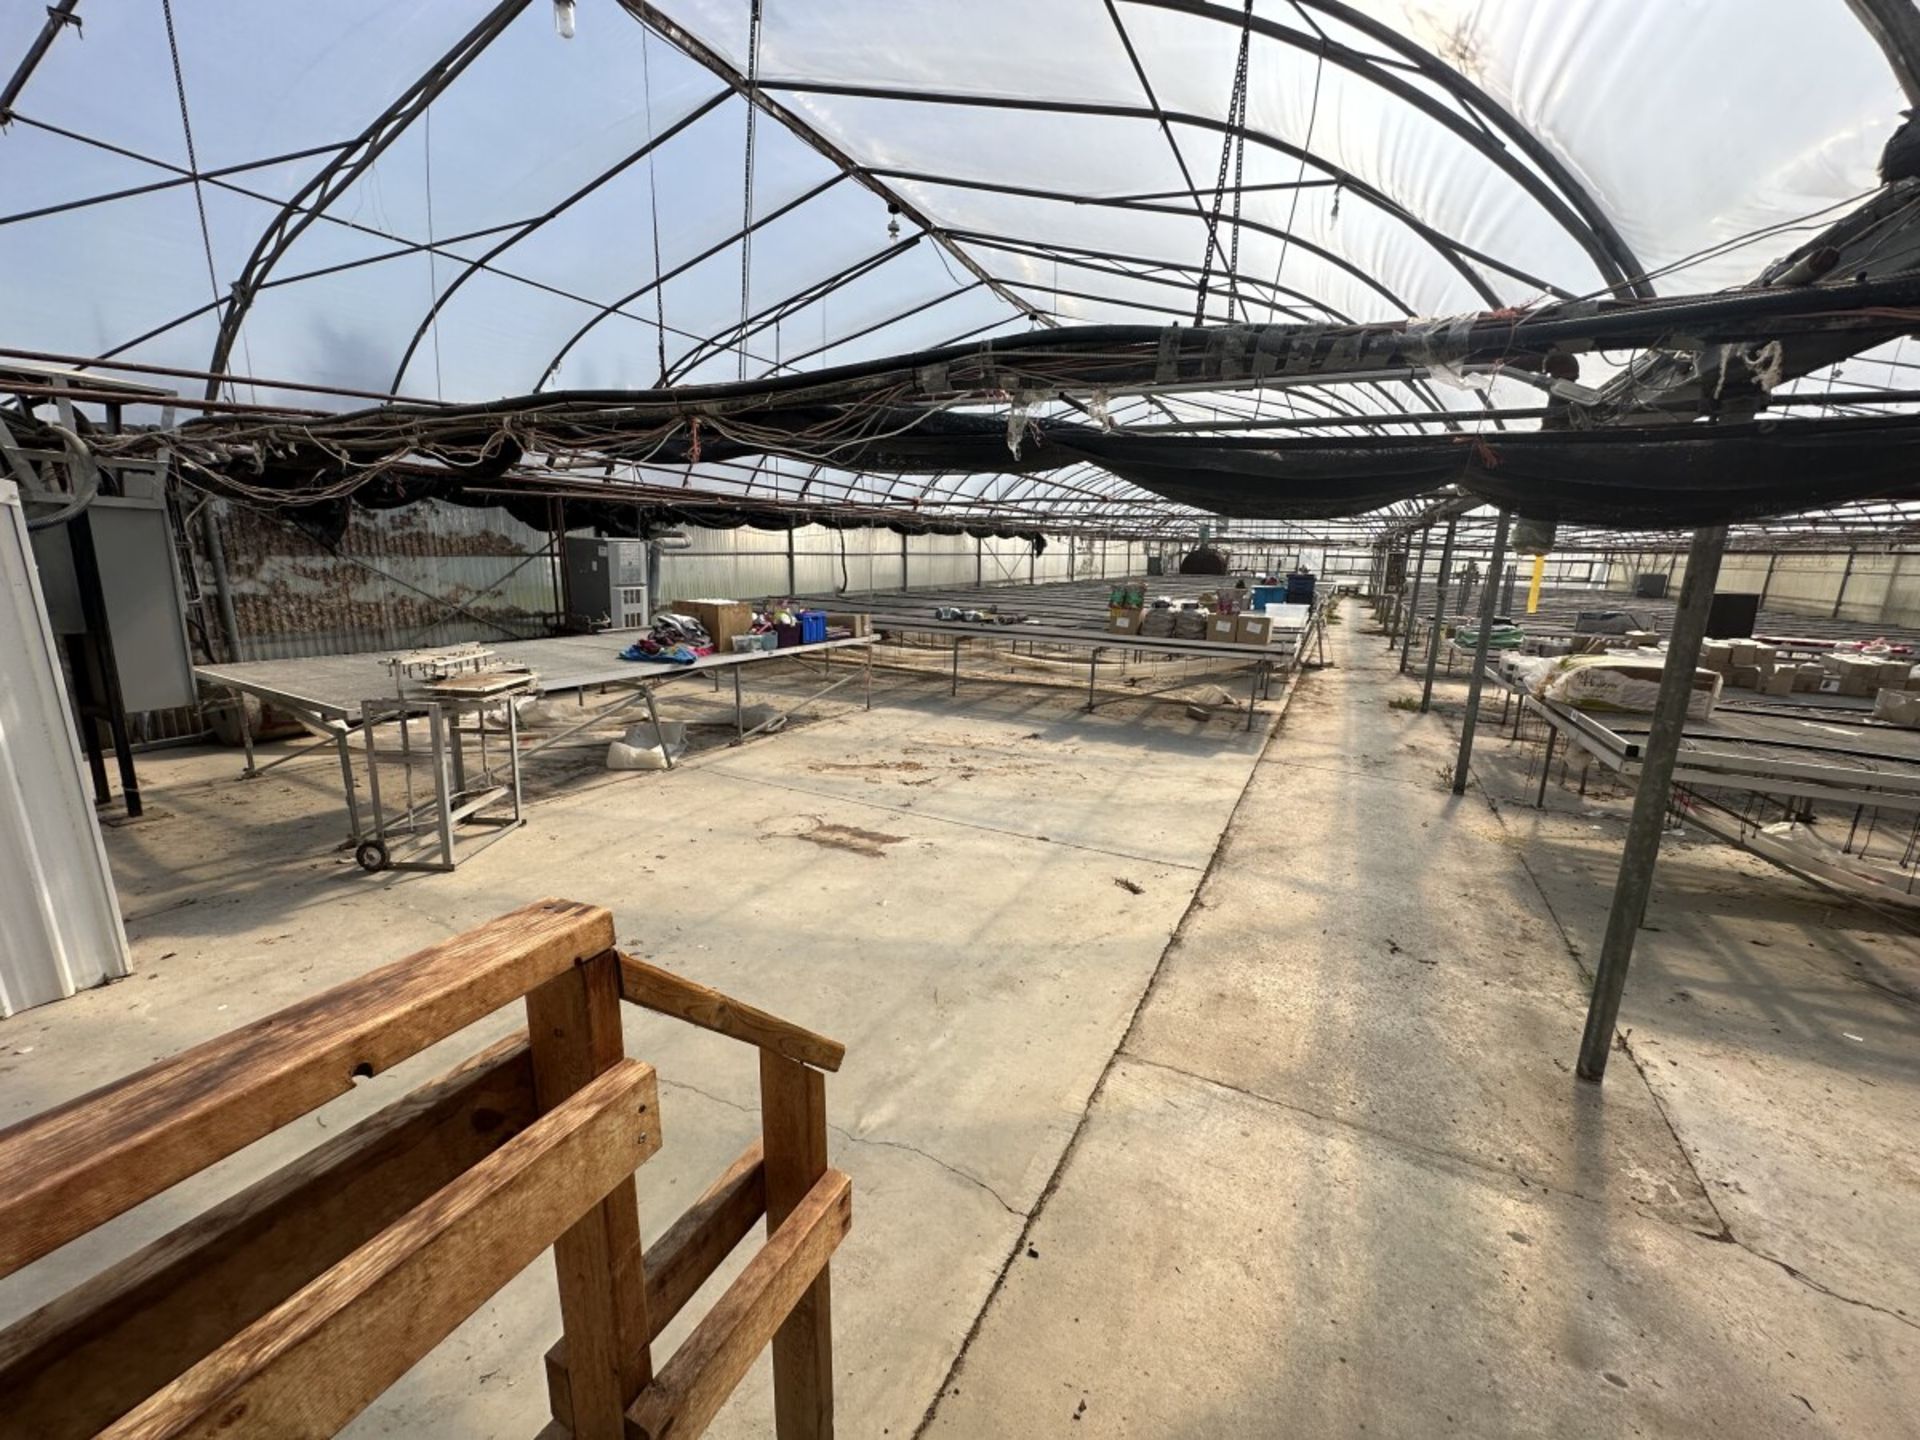 WESTBROOK GUTTER CONNECT 2-BAY GREENHOUSE 60FT X 144FT X 96” H & 2-BAY 60FT X 72 FT X 96”, INCLUDING - Image 34 of 95